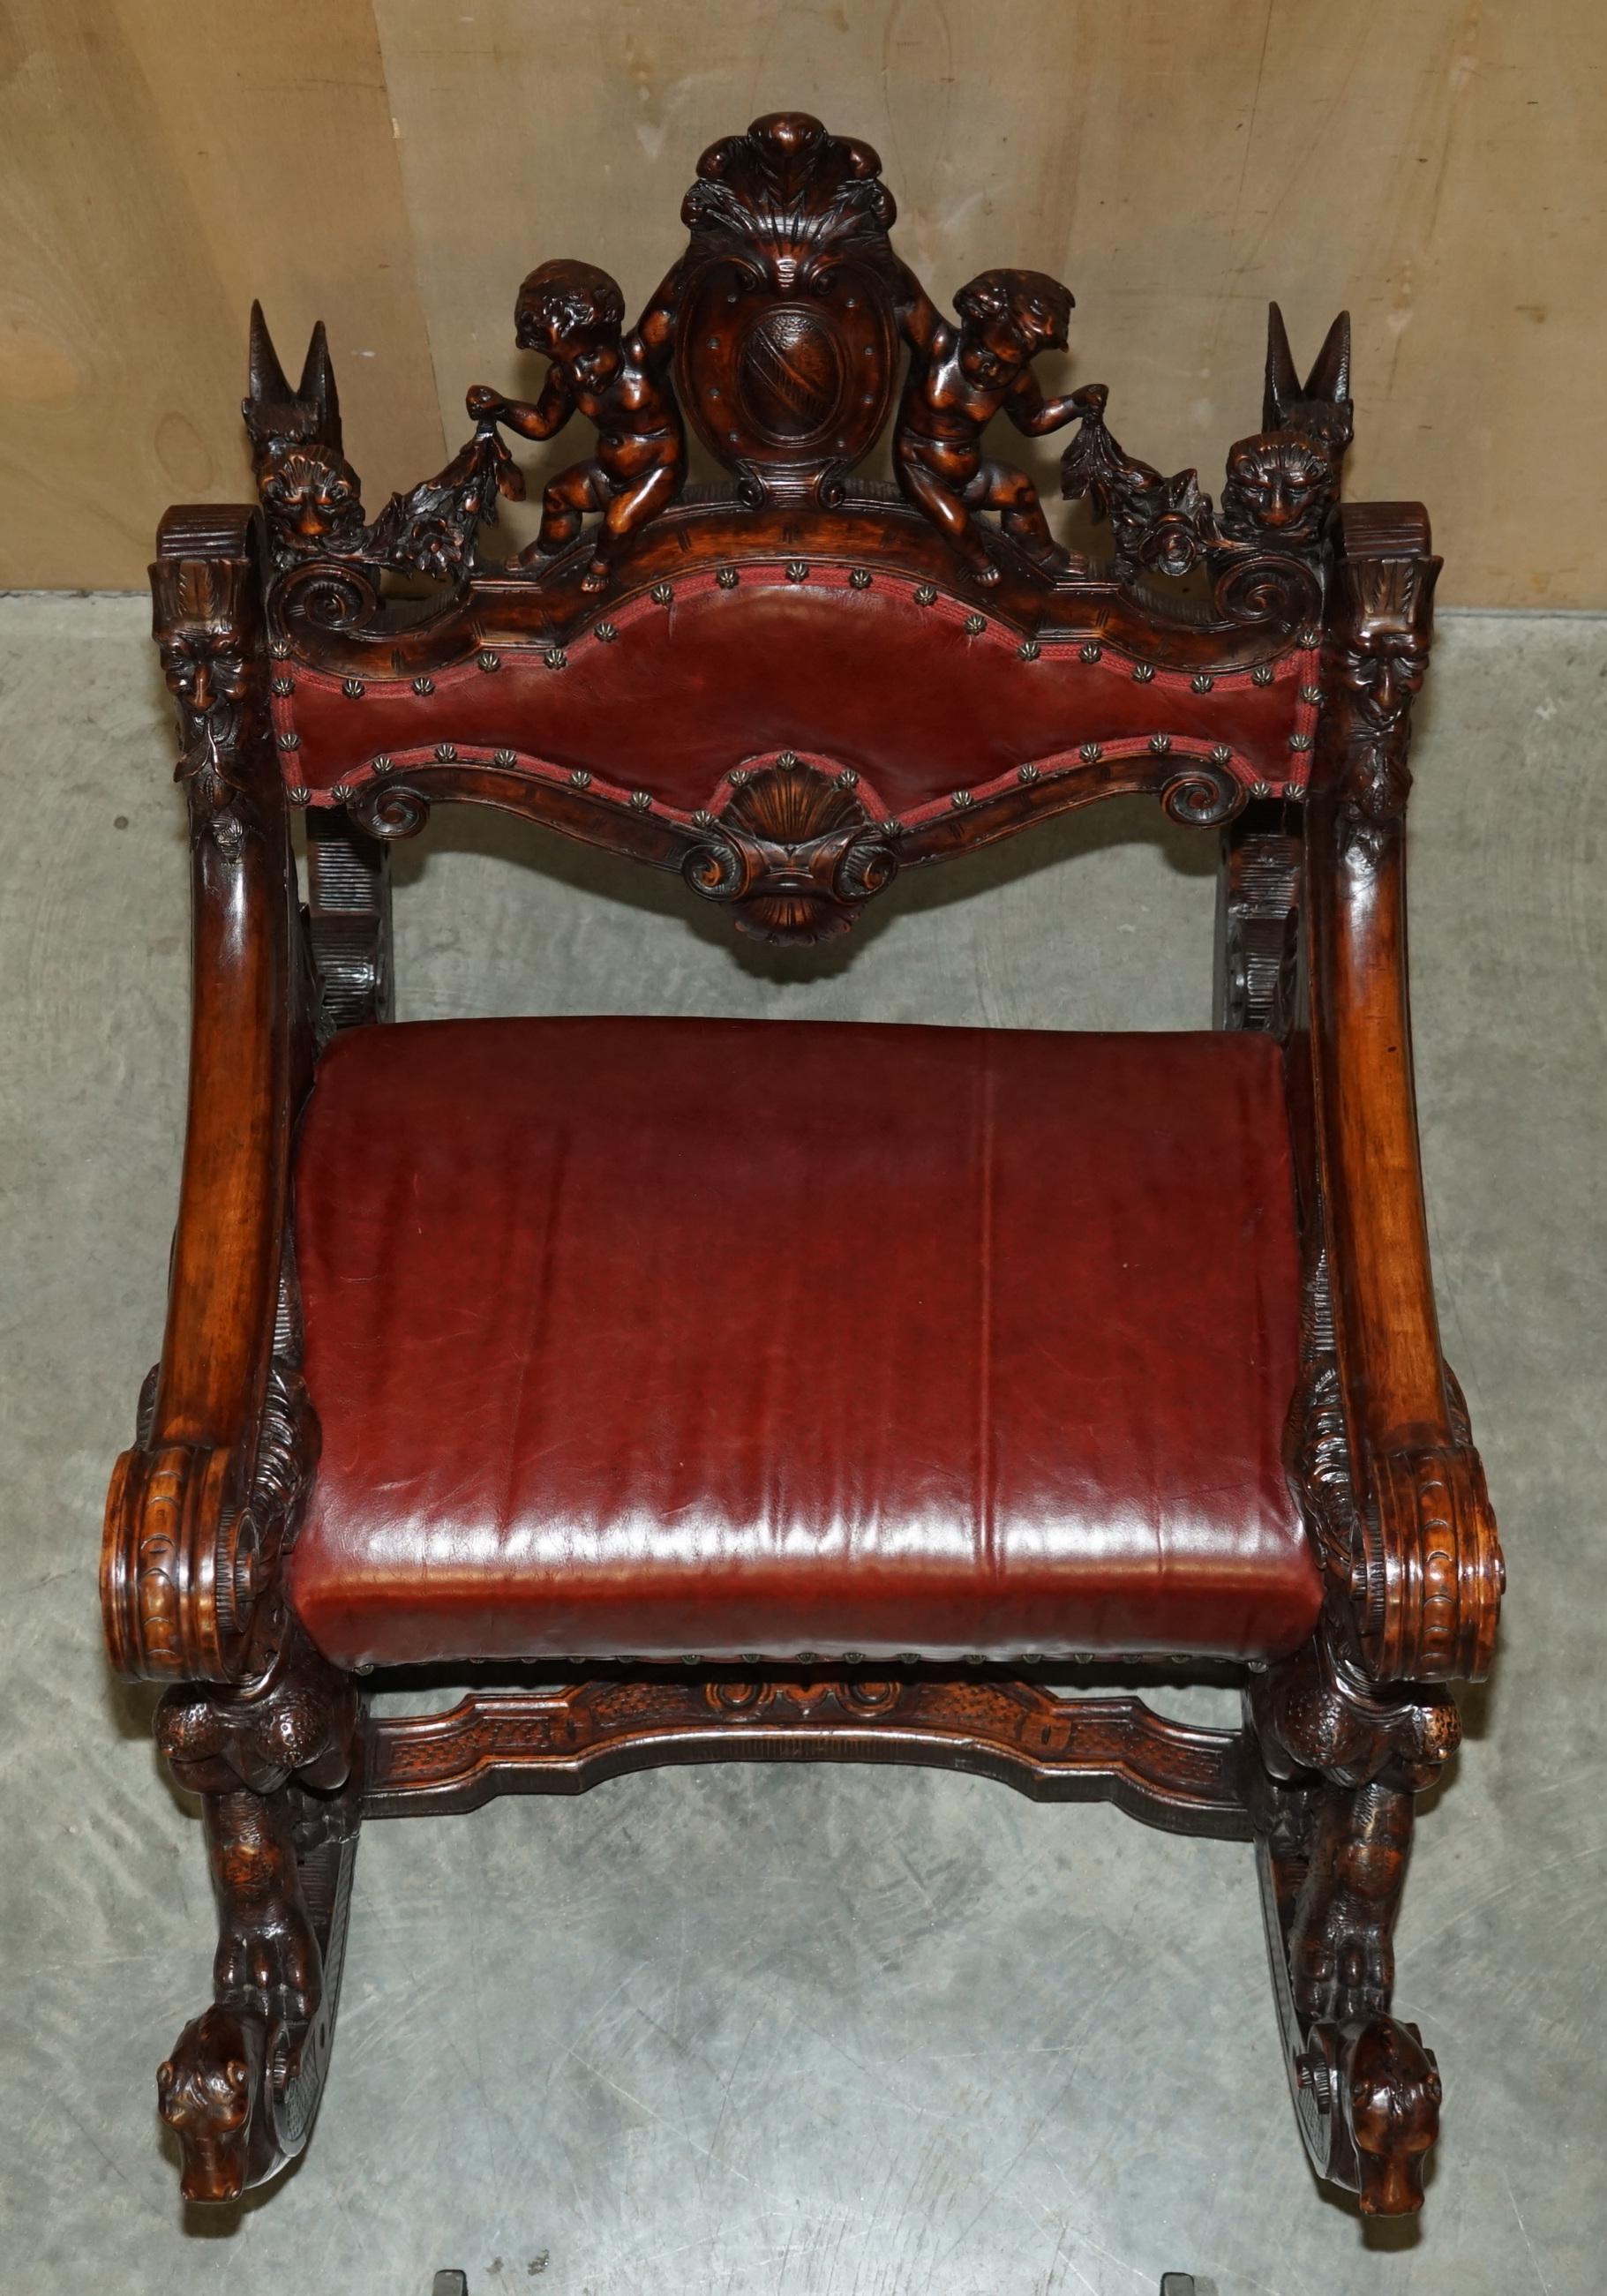 ANTIQUE ITALIAN CIRCA 1850 HAND CARVED FRUITWOOD LEATHER ROCKiNG ARMCHAIR For Sale 6